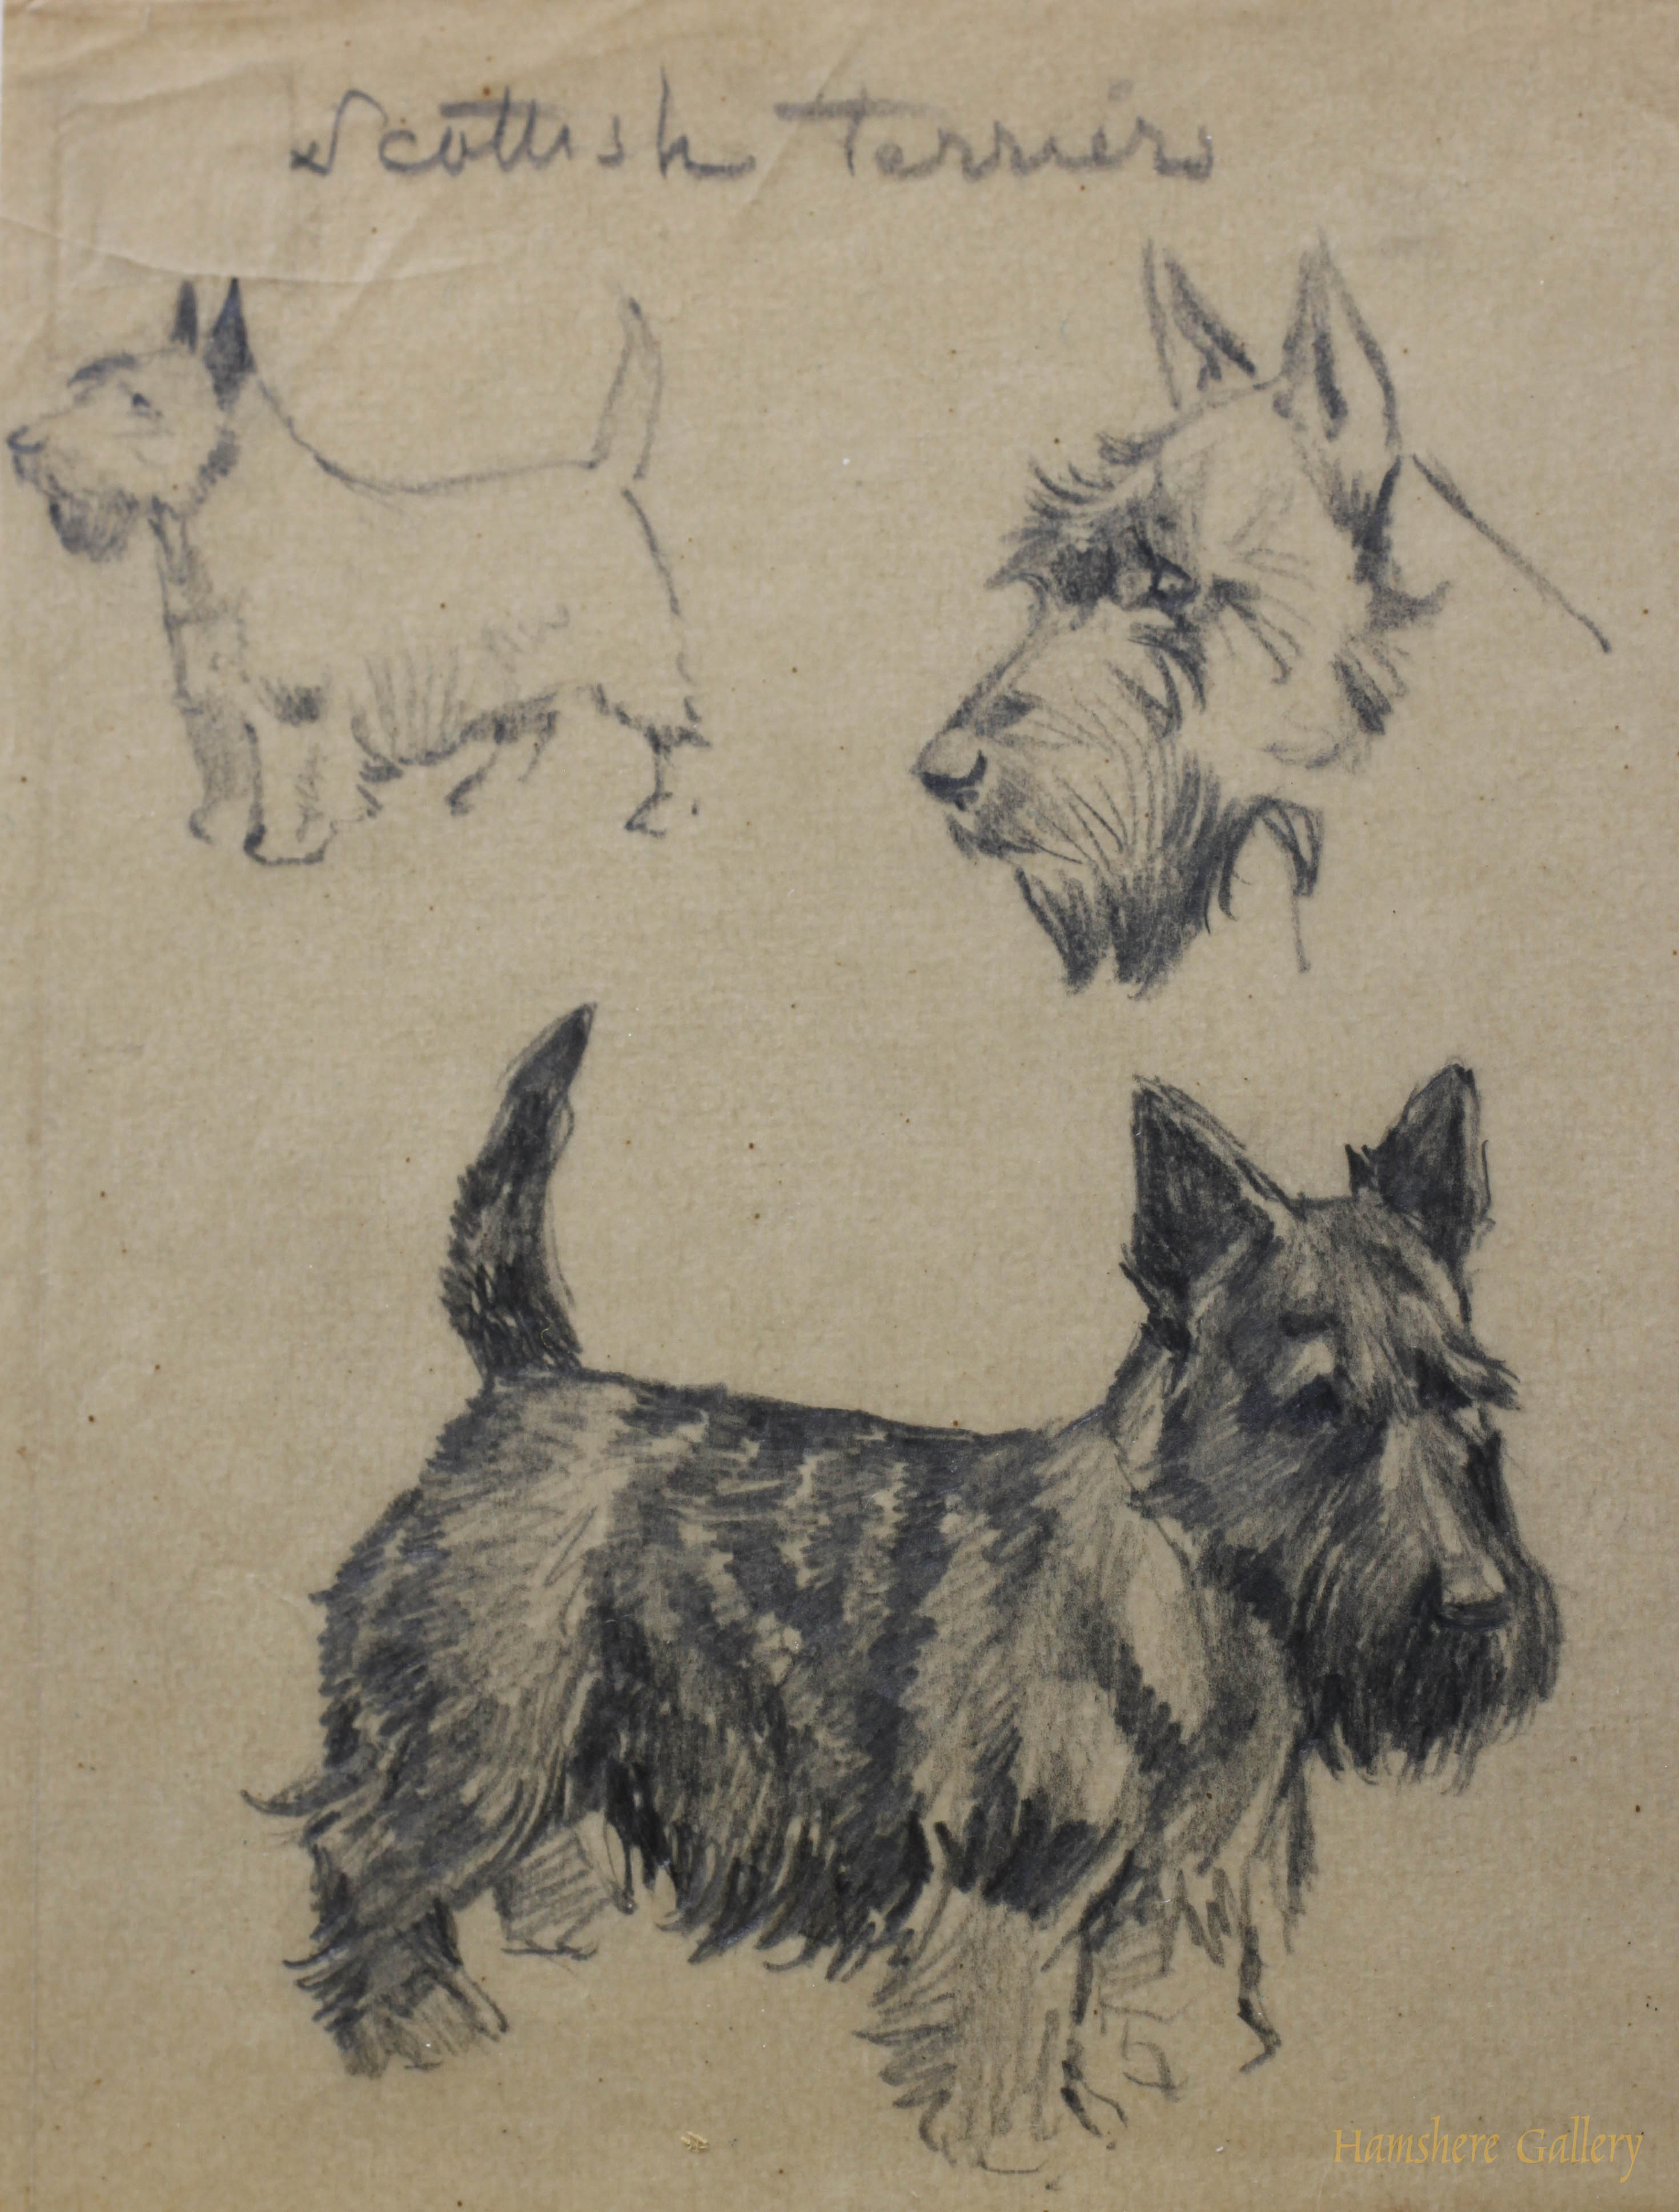 Click to see full size: Scottish Terrier pencil studies by Borris O’Klein / Jean Herblet- Scottish Terrier pencil studies by Borris O’Klein / Jean Herblet